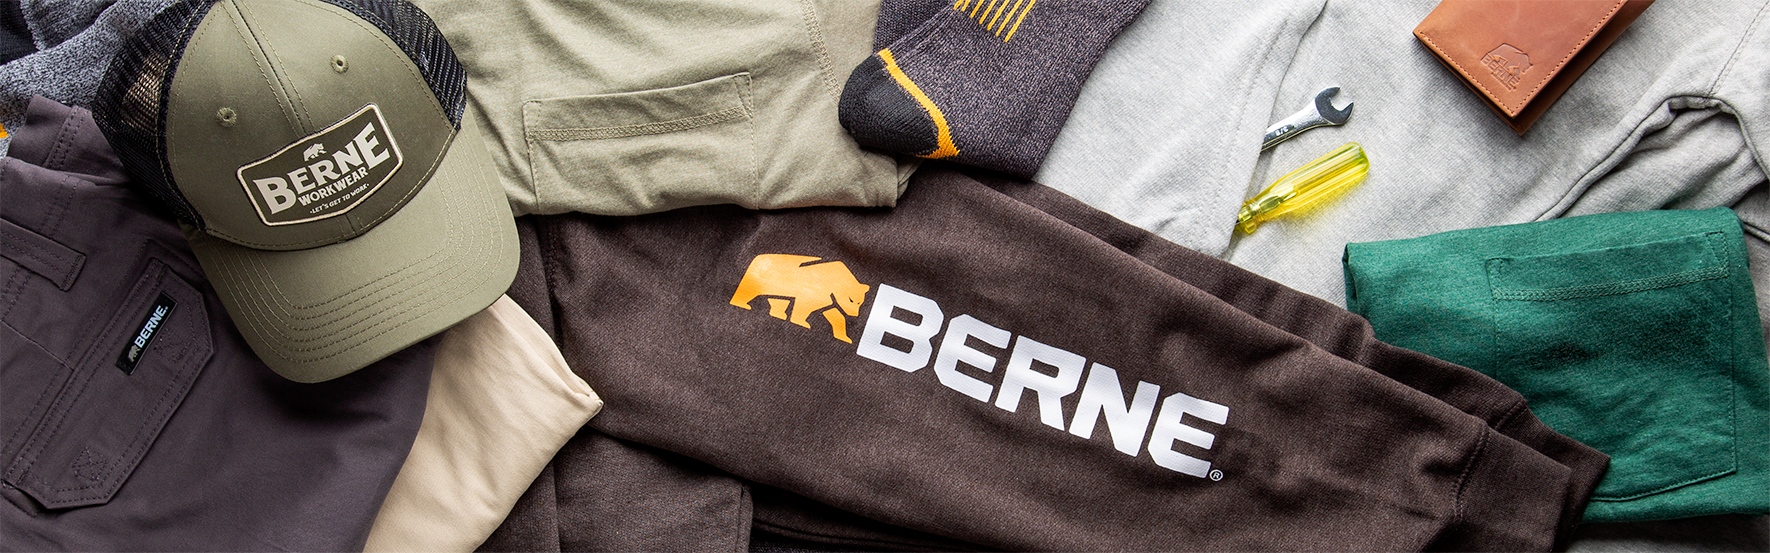 Berne mens fathers day gifts for dad